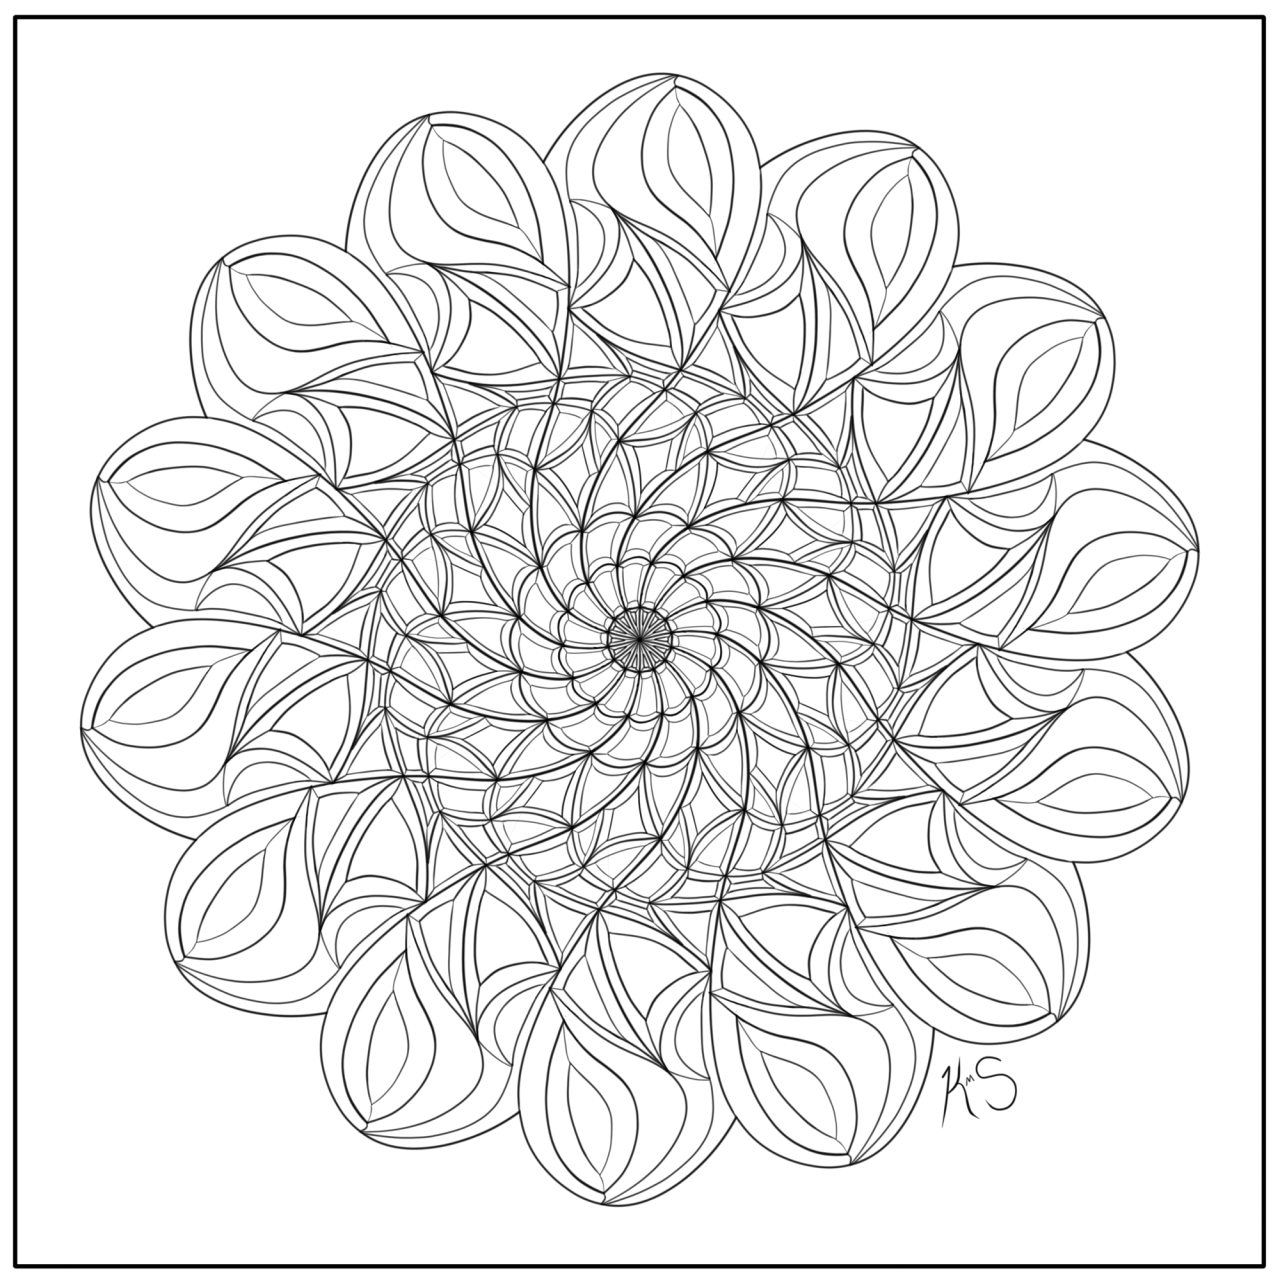 Adult coloring pages for relaxation and stress management